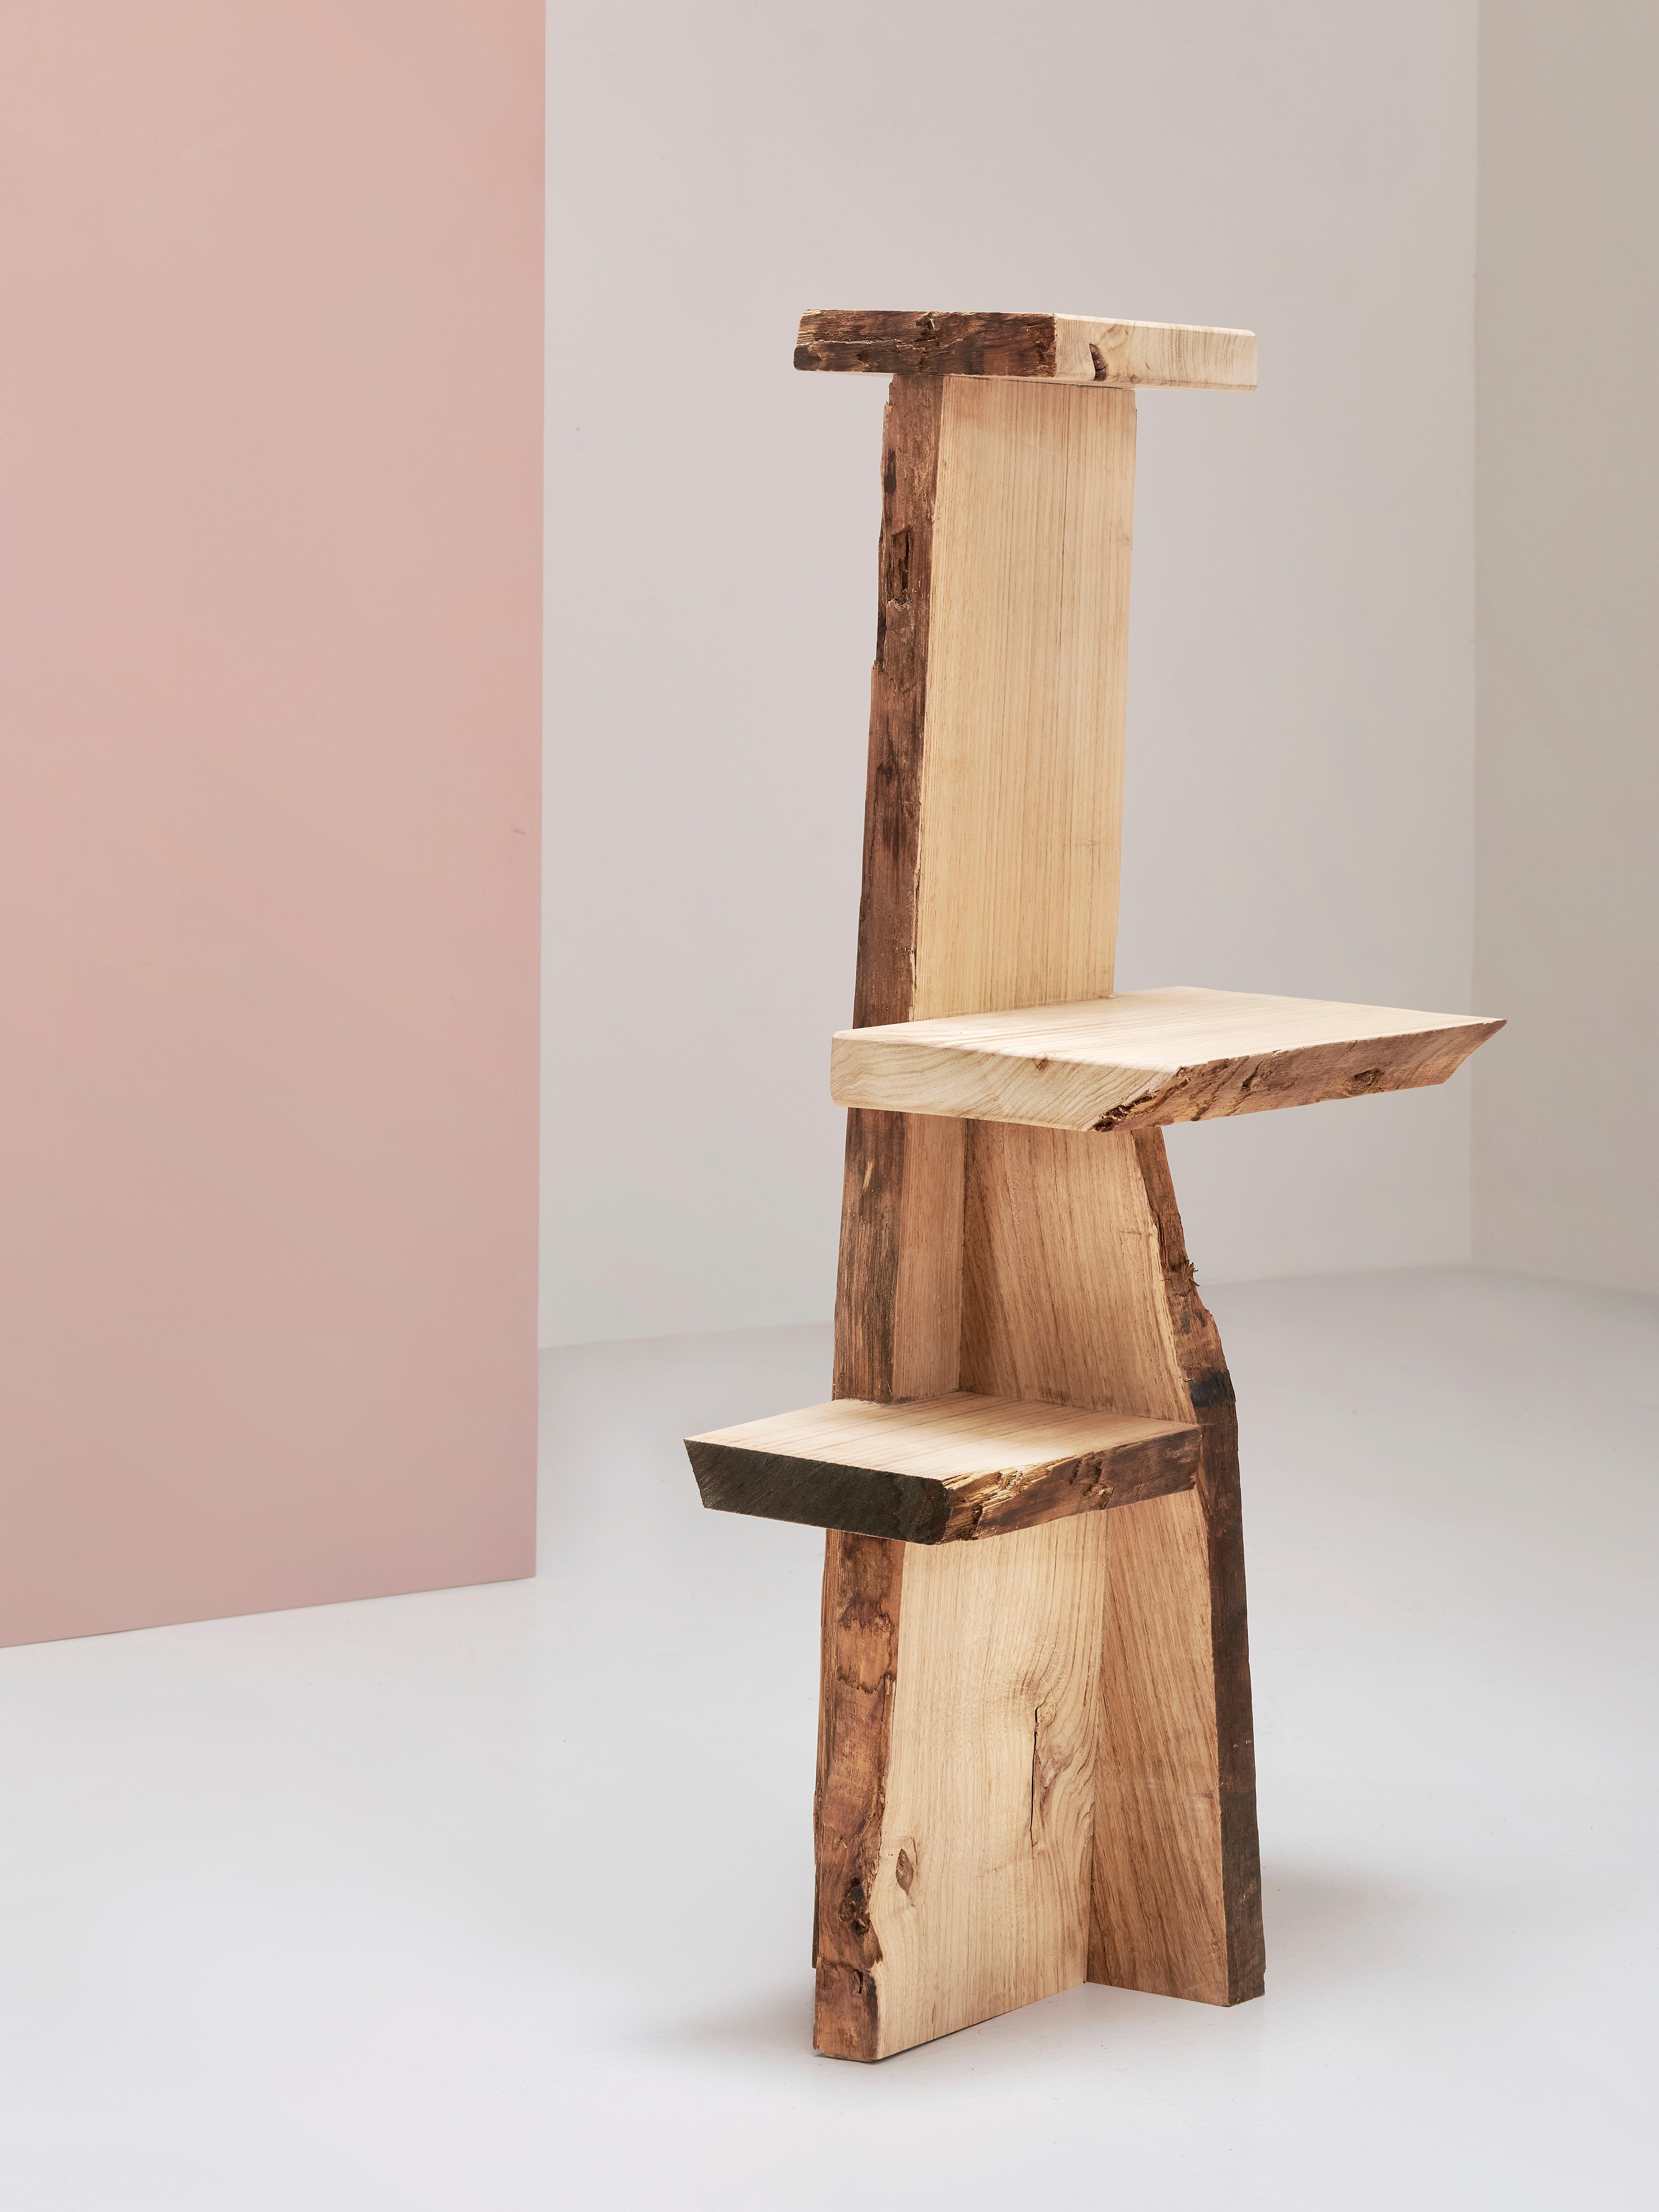 Ripped Wood Tripple Podium by Willem Van Hooff
Handmade
Dimensions: W 45 x H 110 cm (Dimensions may vary as pieces are hand-made and might present slight variations in sizes)
Materials: Wood.


Willem van Hooff is a designer based in Eindhoven.
He